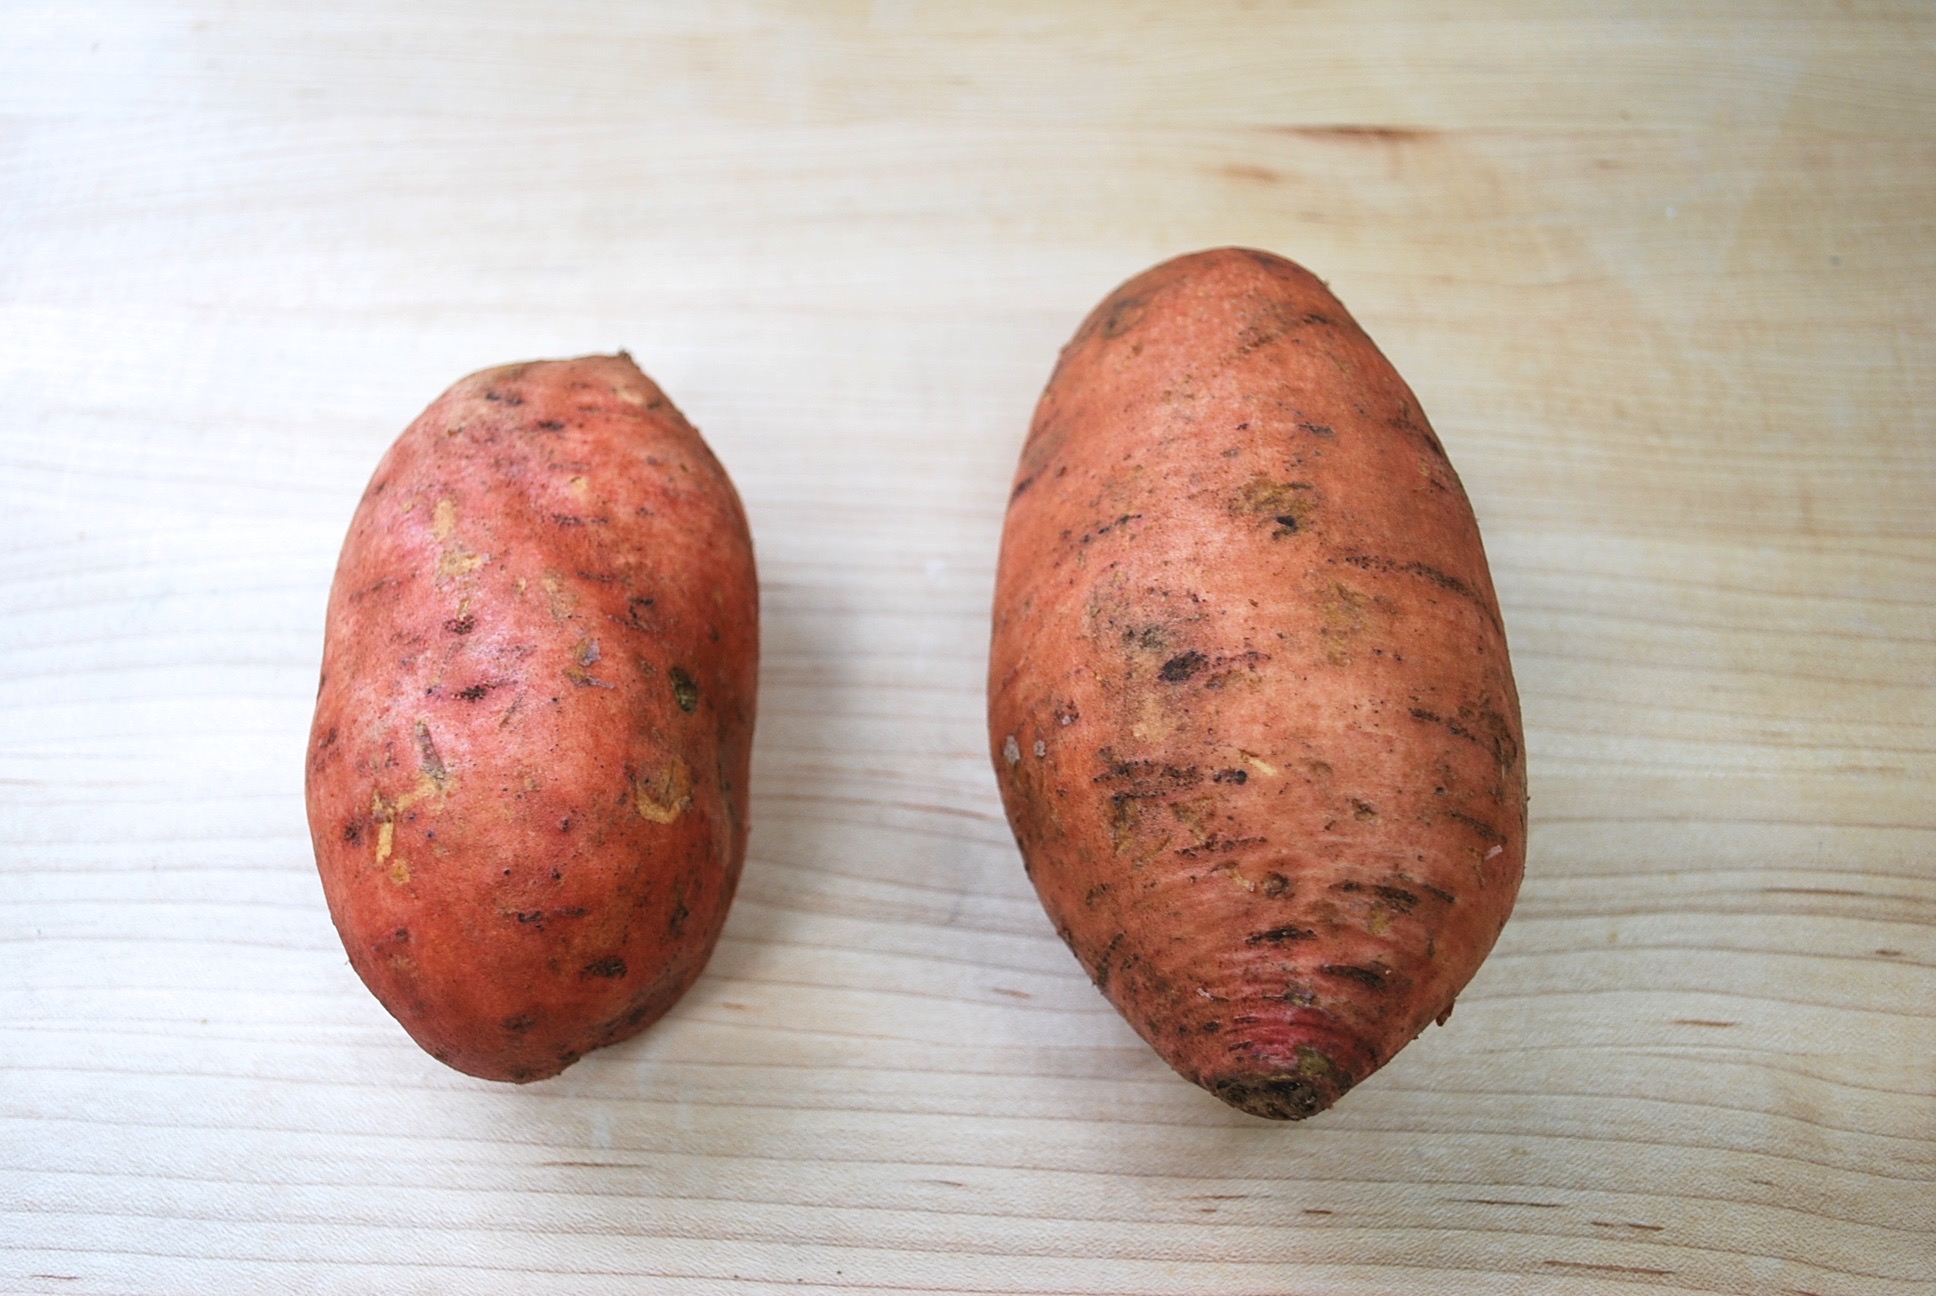 A small and large sweet potato.